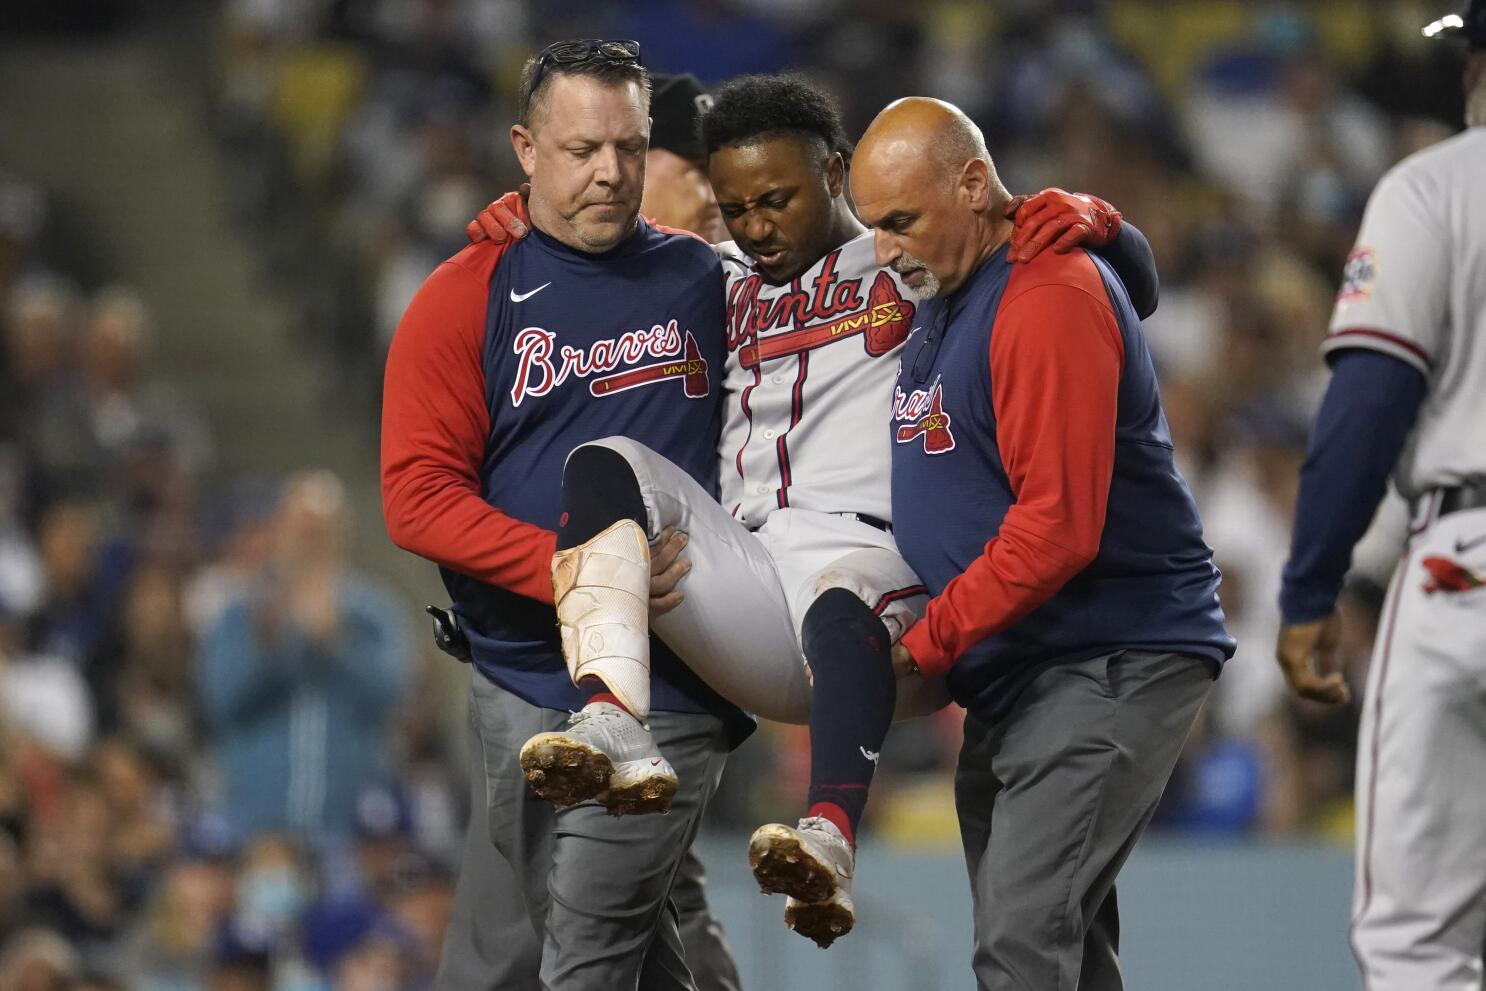 Braves star Albies carried away after fouling ball off knee - The San Diego  Union-Tribune